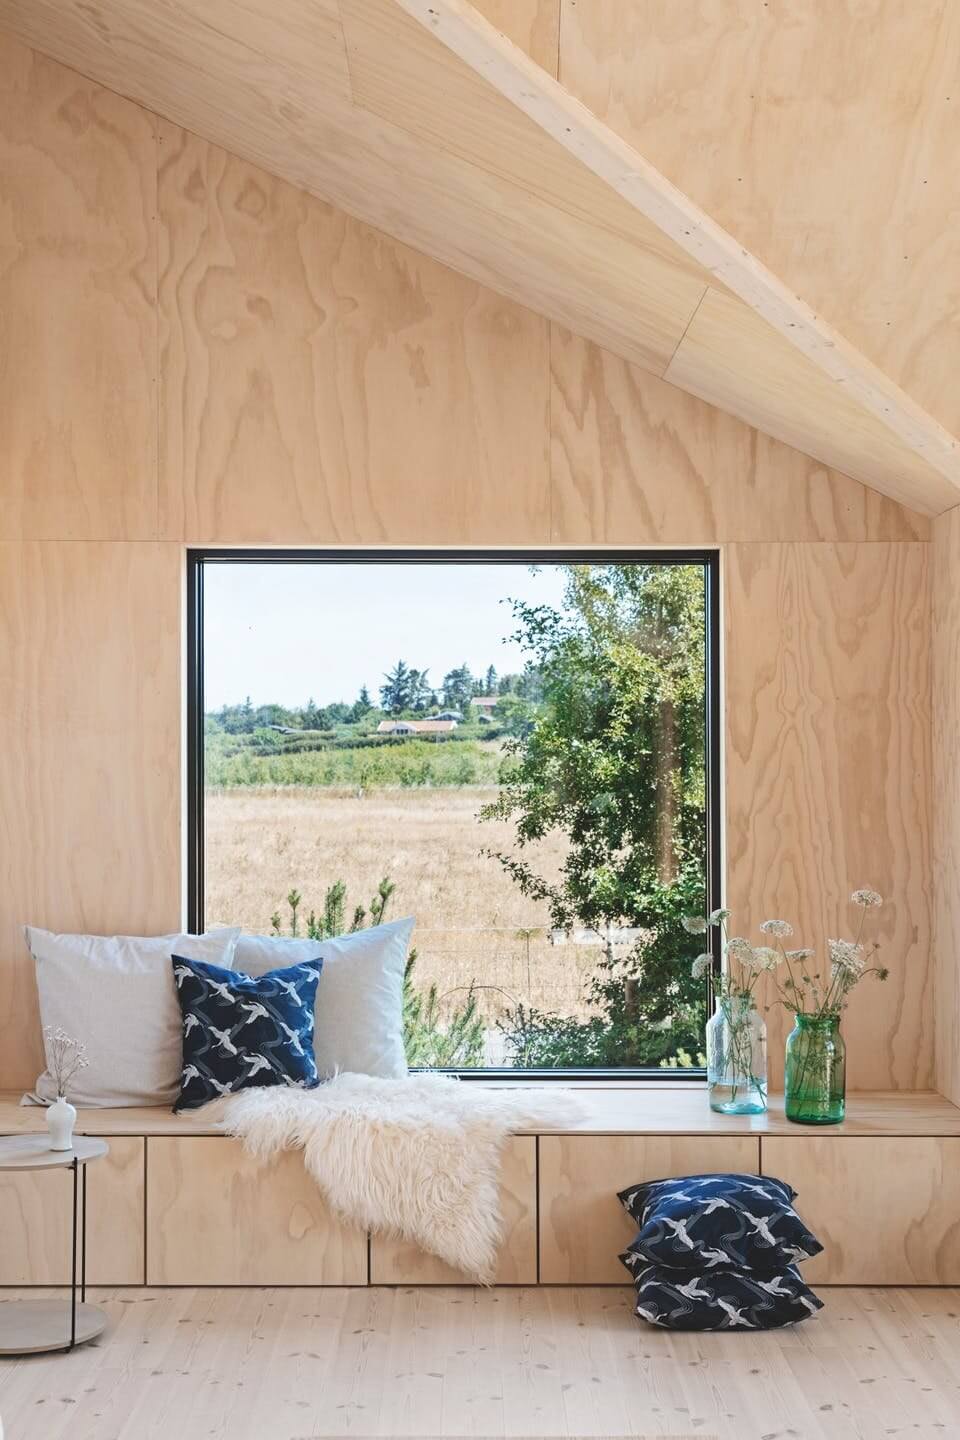 Bestof2019 SmallHomes TheNordroom22 Best of 2019: Small Homes